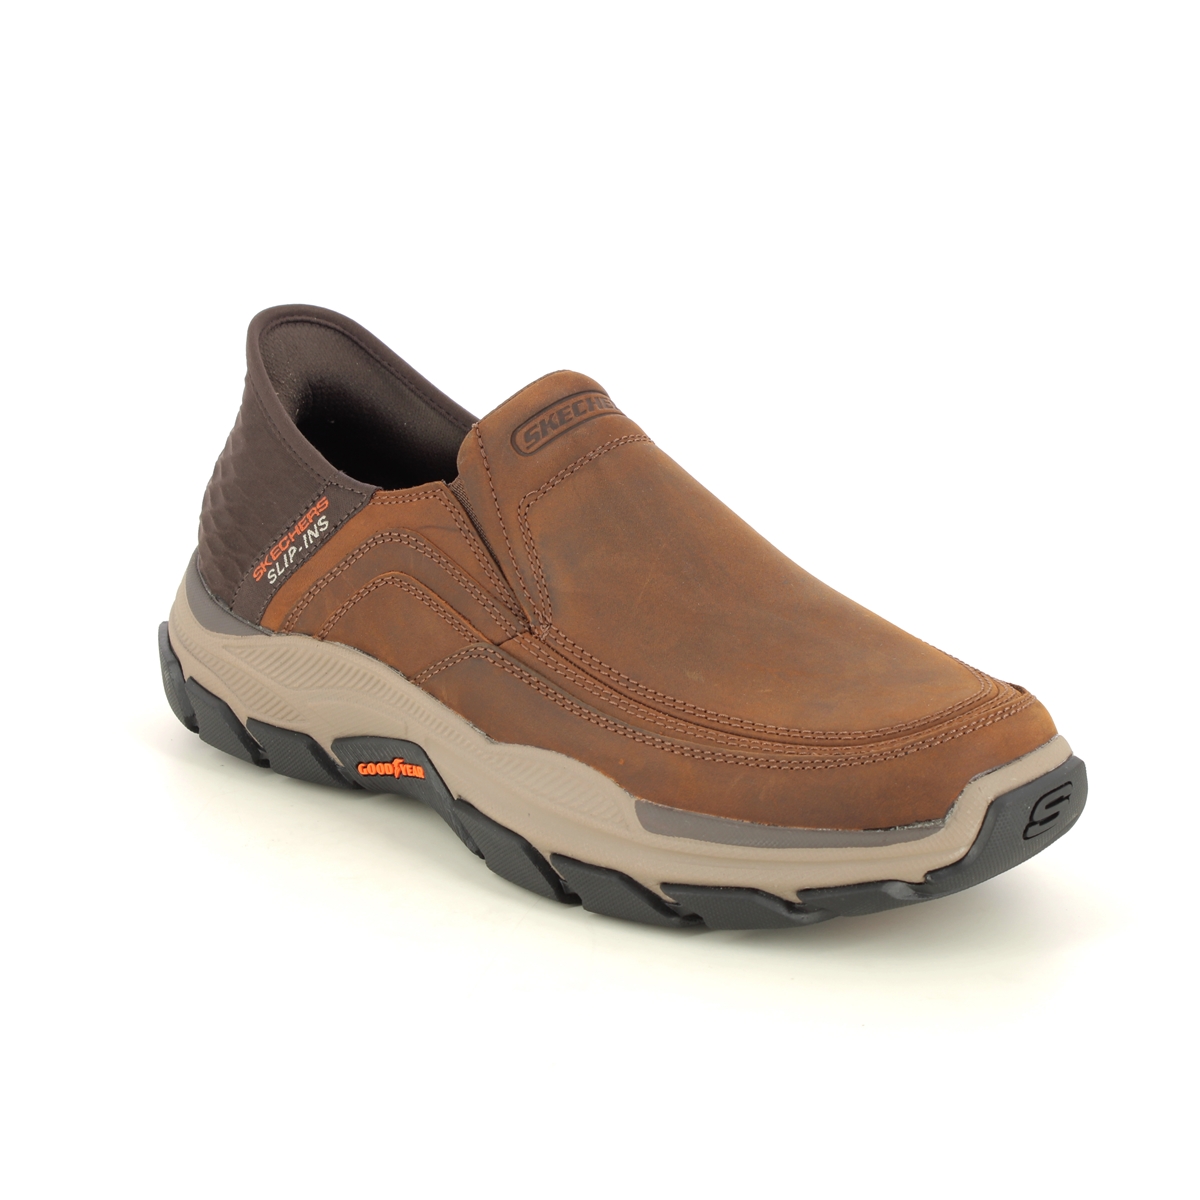 Skechers Slip Ins Respected CDB Brown Mens Slip-on Shoes 204810 in a Plain Leather in Size 7